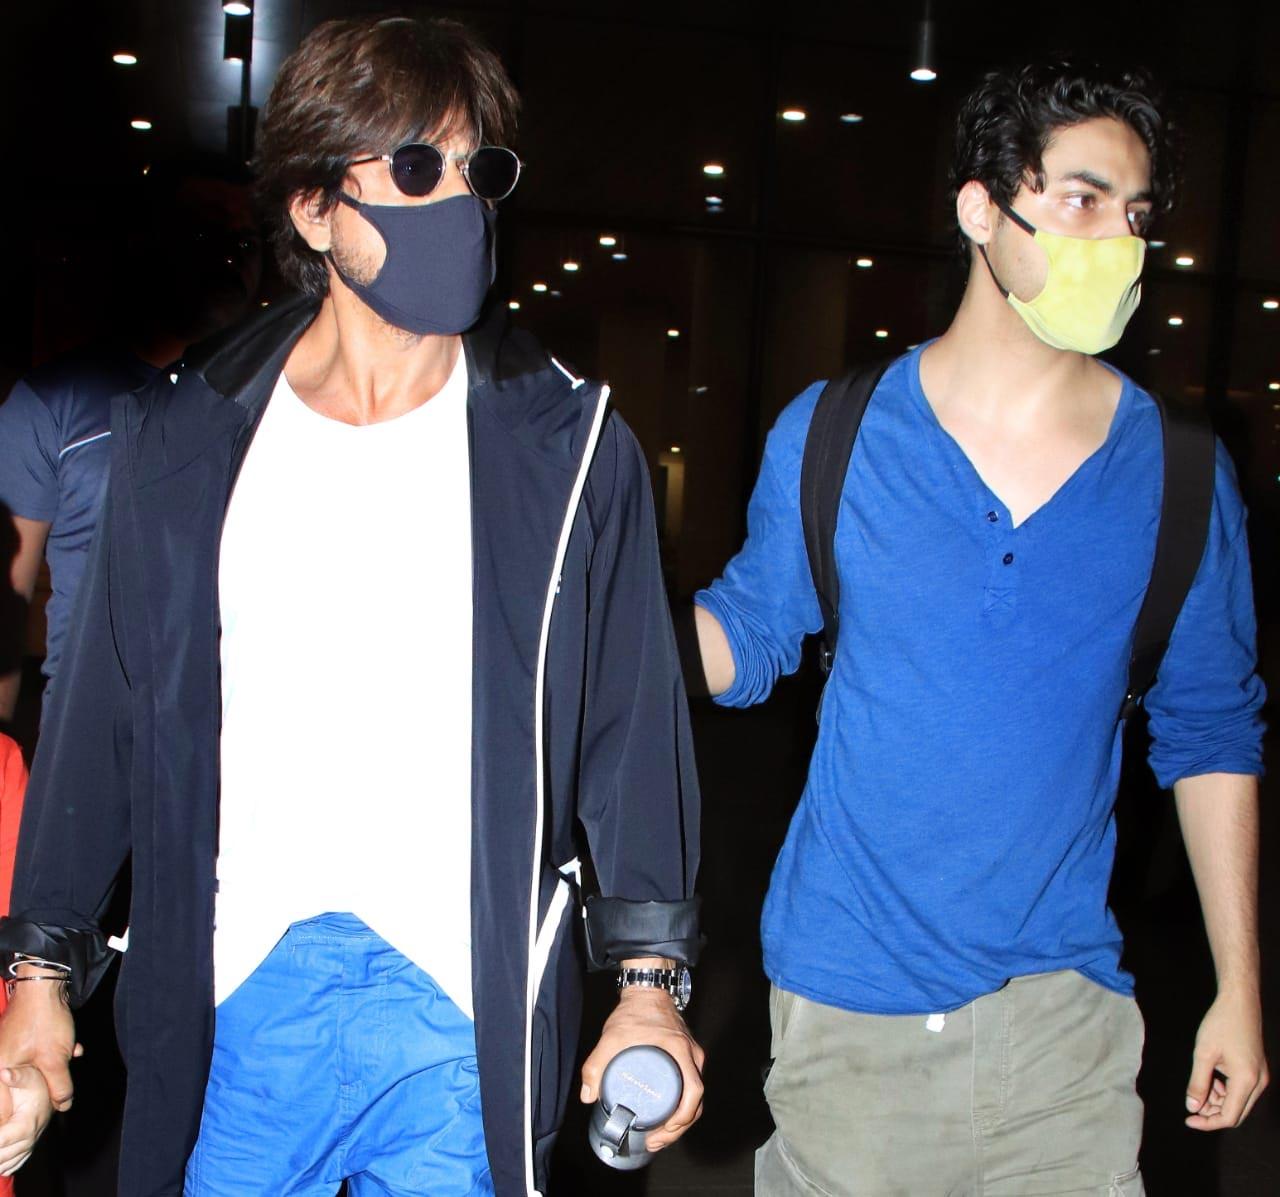 At the Mumbai airport, Shah Rukh Khan, Aryan Khan and AbRam Khan faced a very unusual moment in front of the paparazzi. While the family was getting clicked, one of the fans at the Mumbai airport grabbed the actor's hand. The video where SRK pulled away his hand from he fan, and Aryan Khan rescuing him has already taken the internet by storm